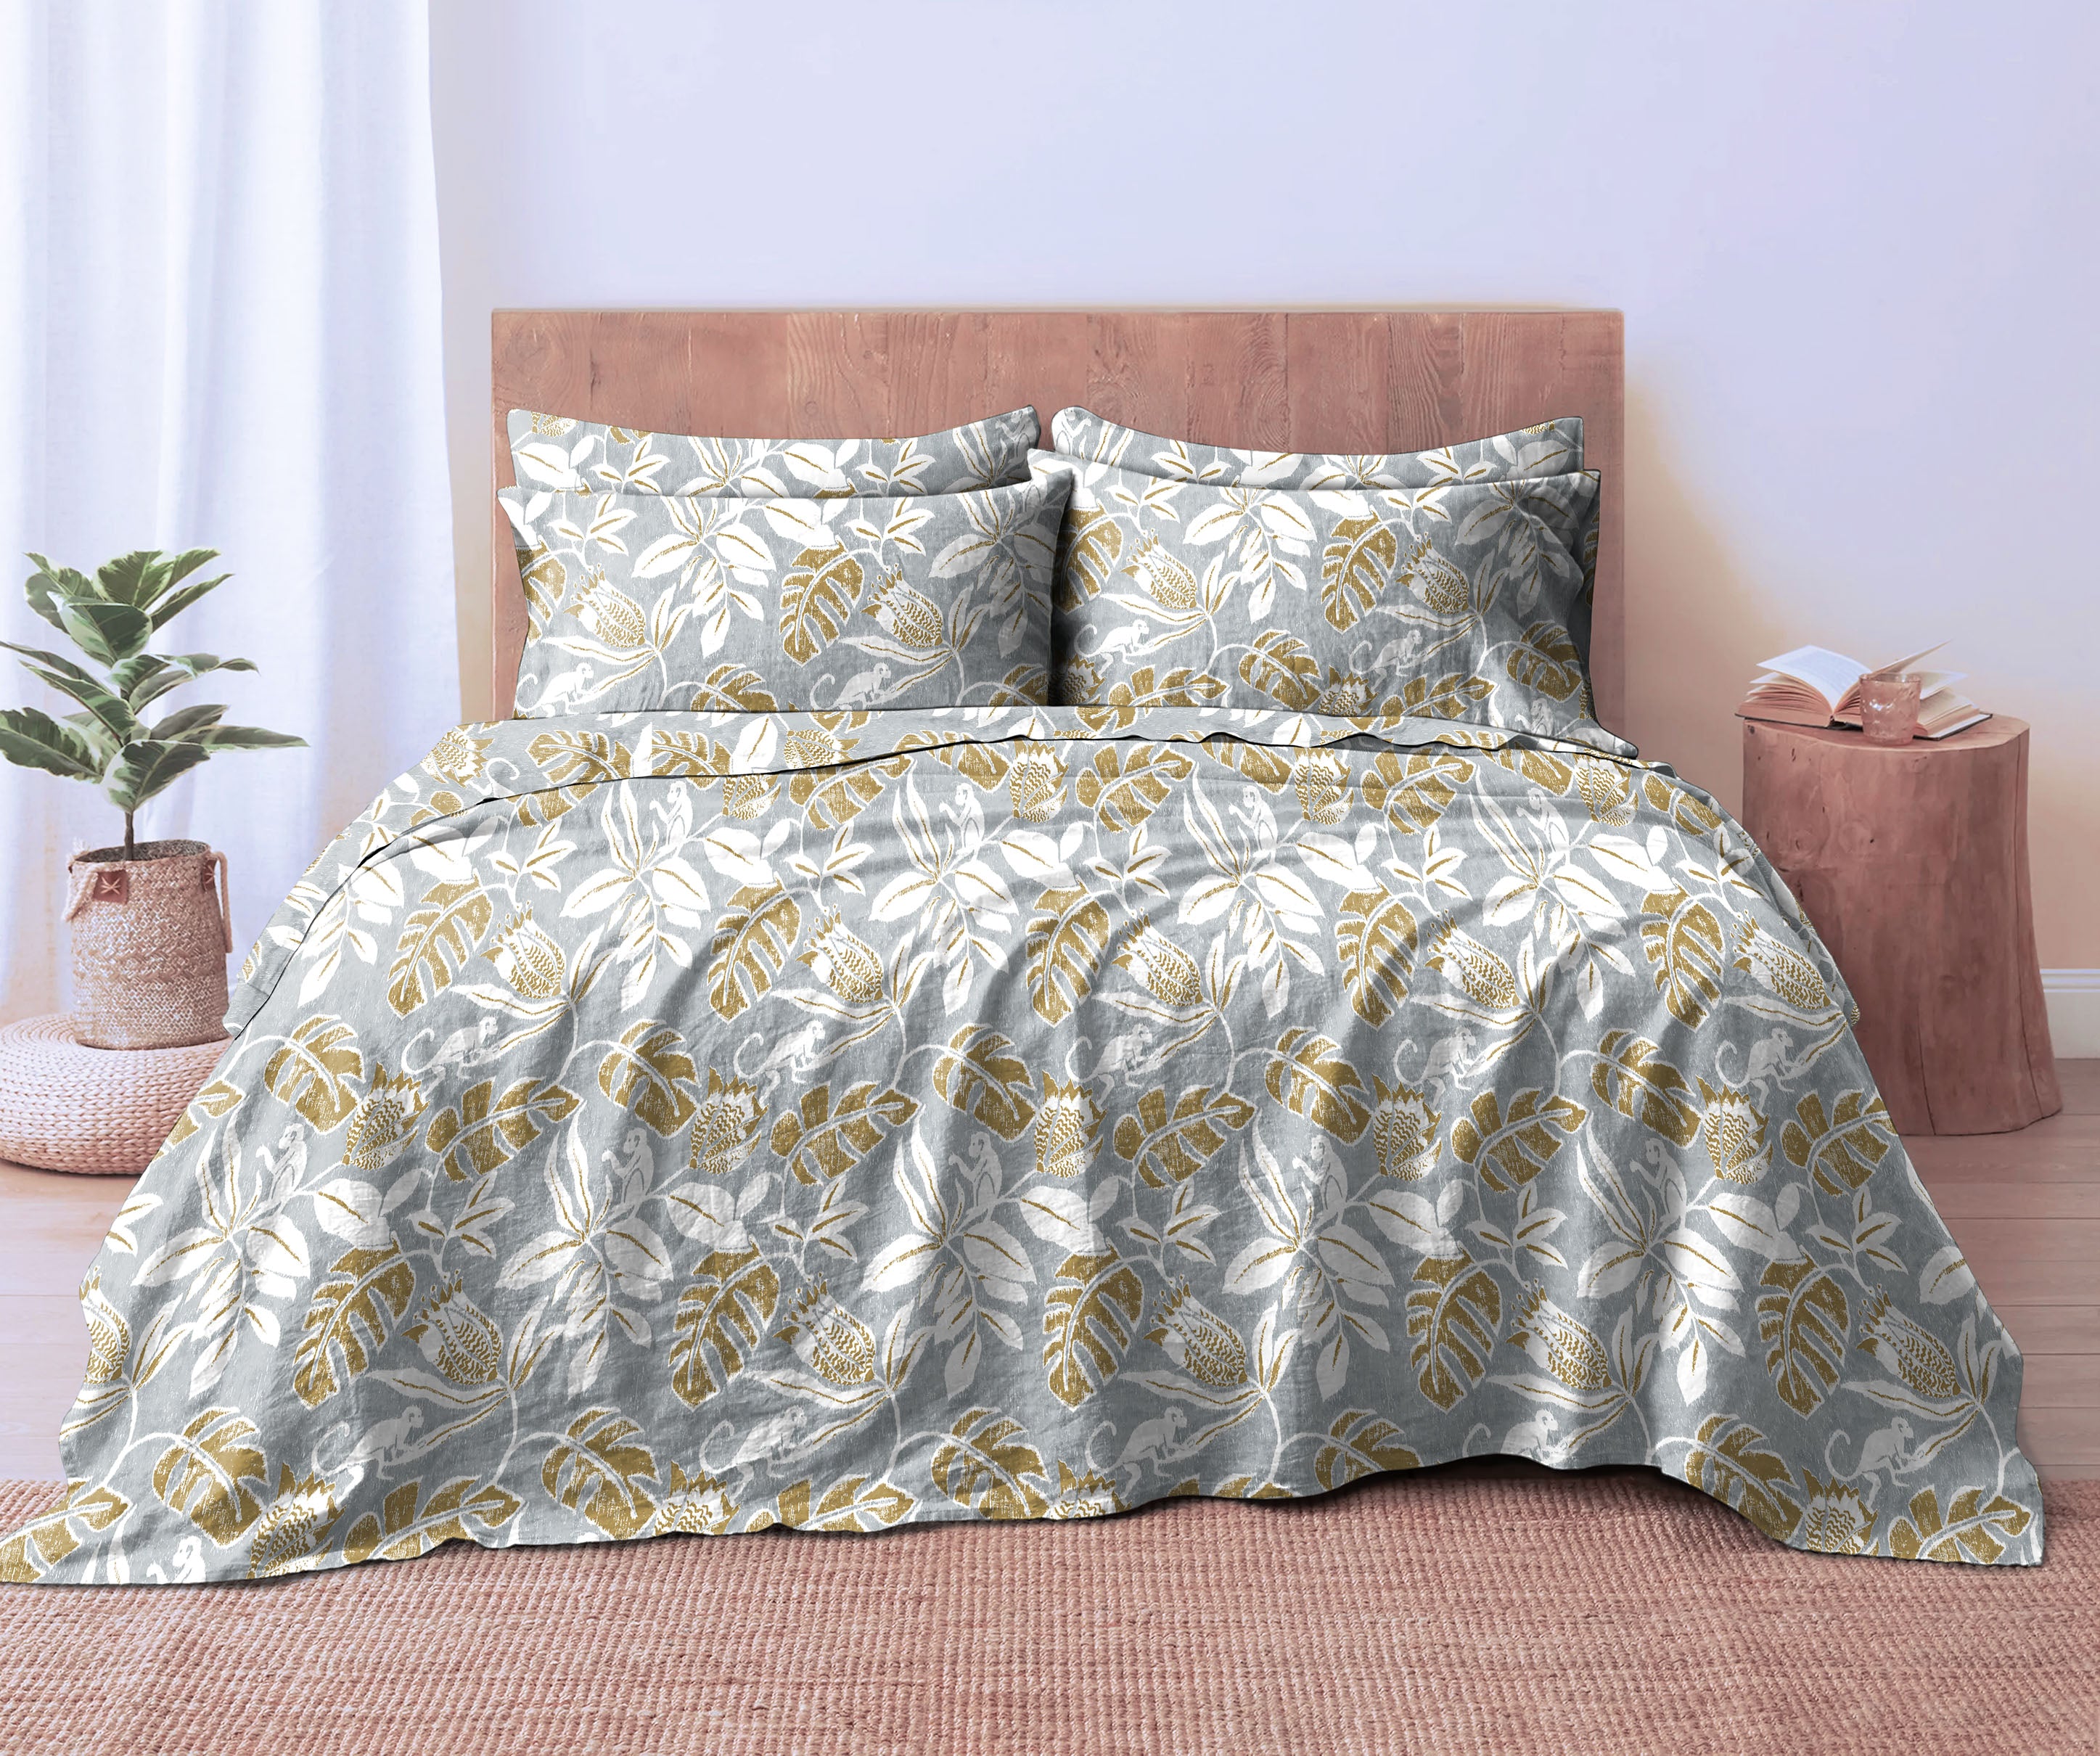 SAVANNA ALUMINIUM BEDCOVER FOR DOUBLE BED WITH 2 PILLOWCOVERS KING SIZE (104" X 90")